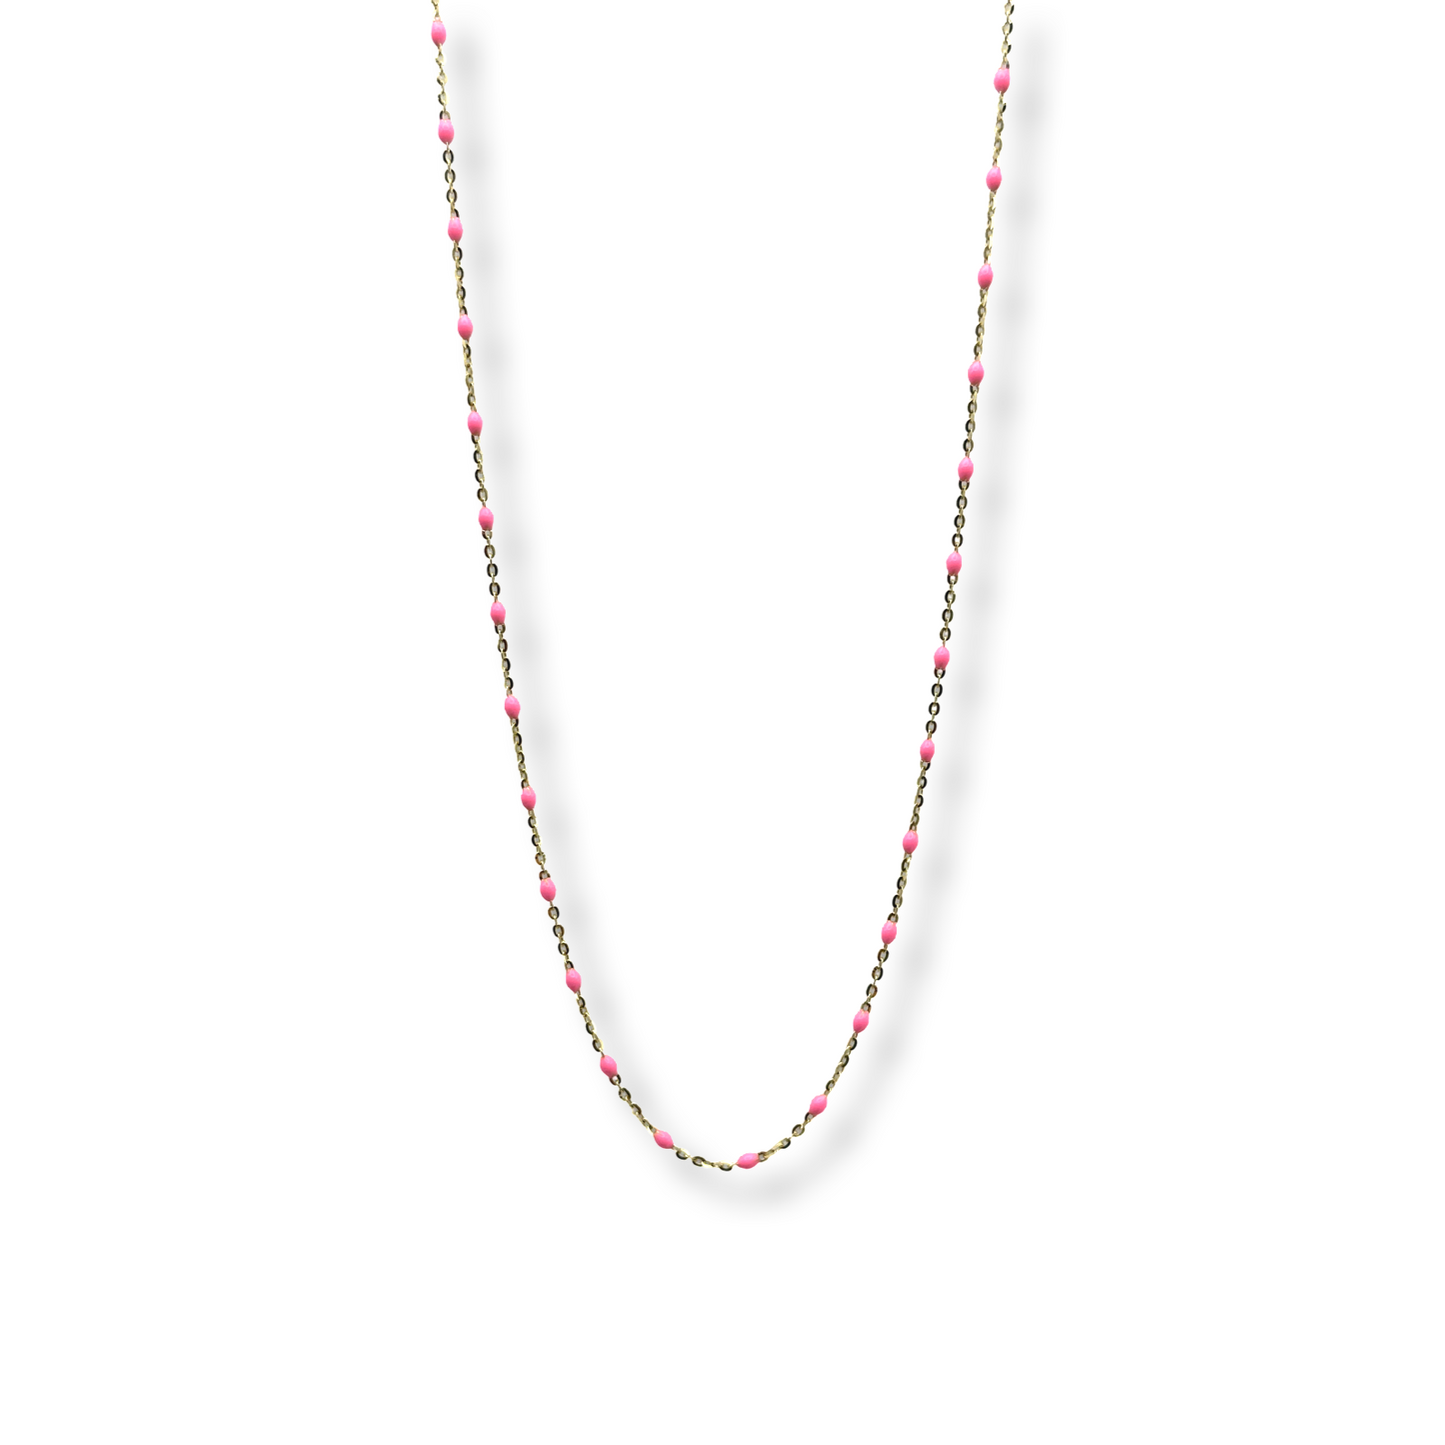 BEADED PINK NECKLACE